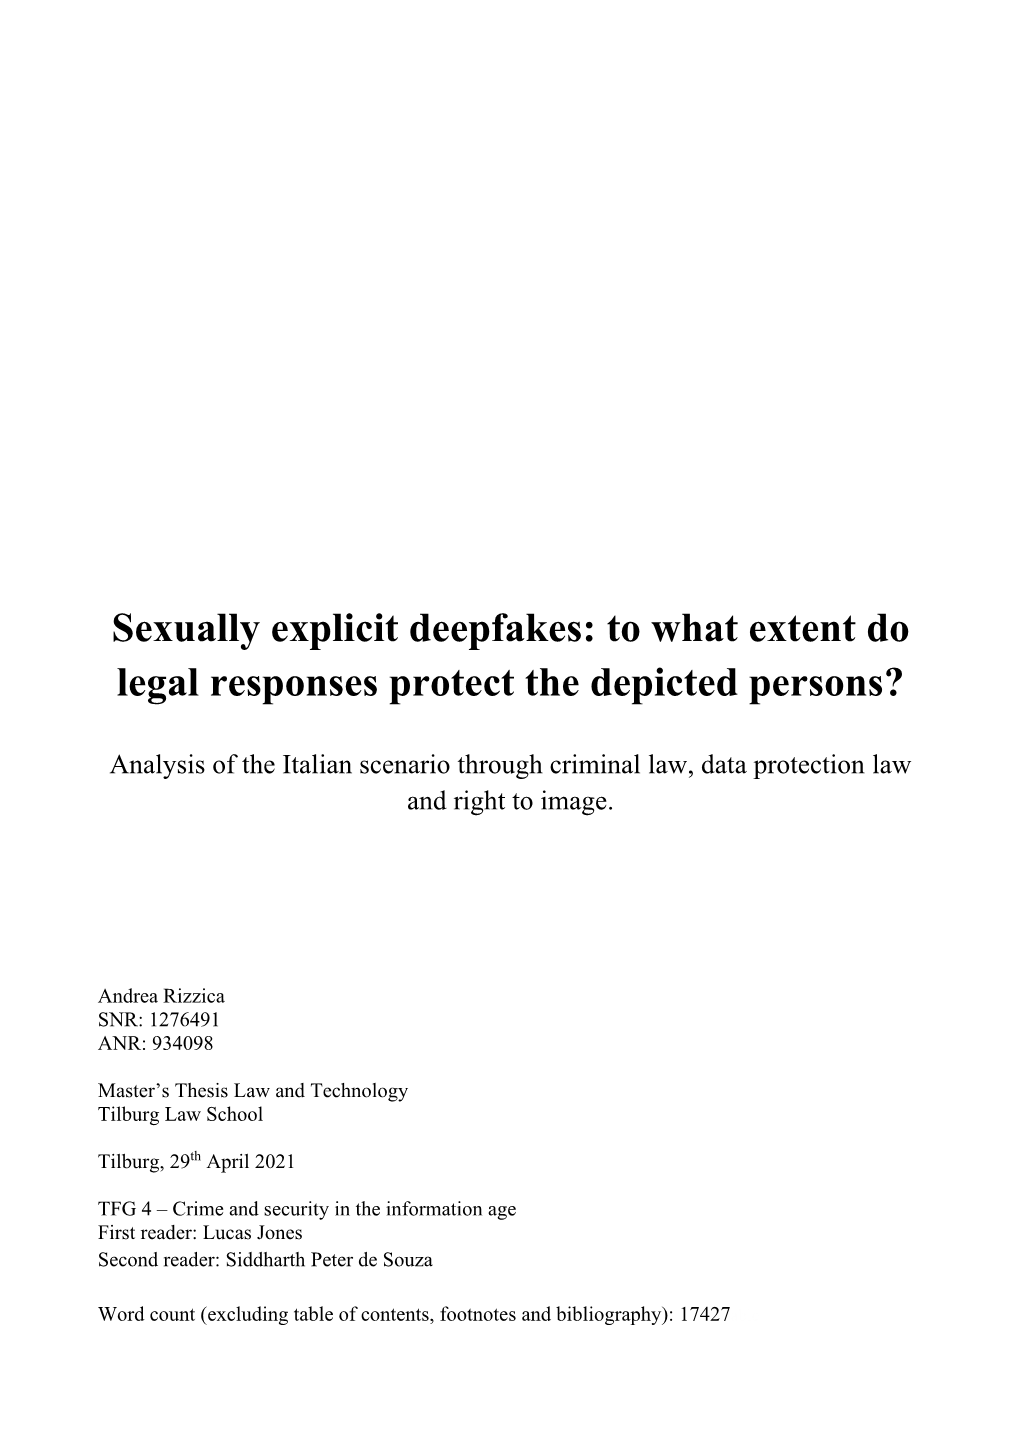 Sexually Explicit Deepfakes: to What Extent Do Legal Responses Protect the Depicted Persons?